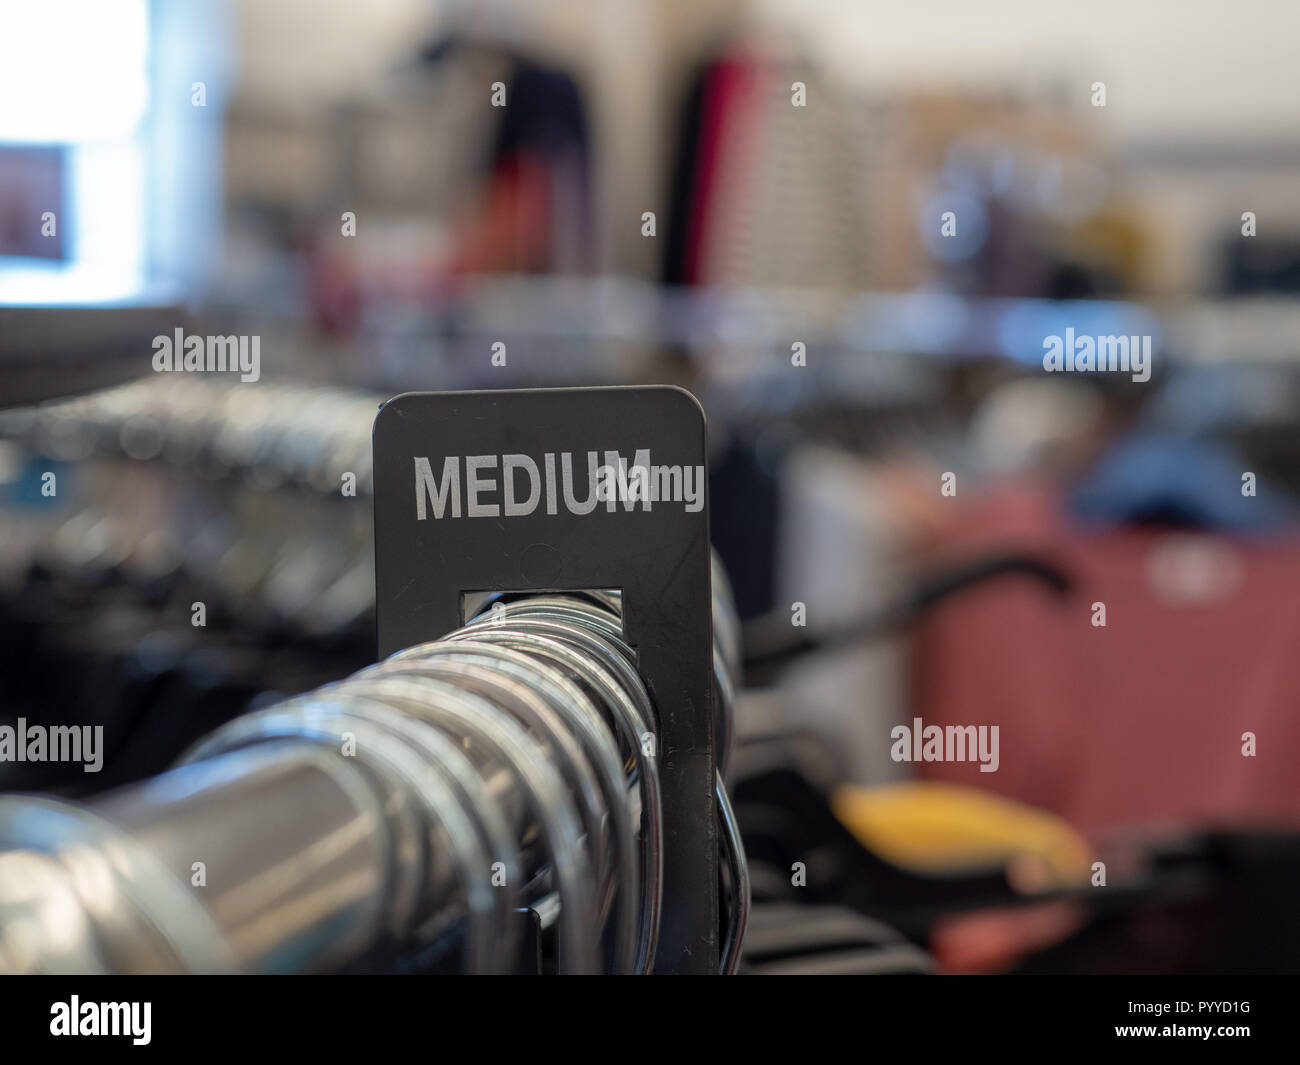 Medium section sign on steel clothing rack with hangers in department store Stock Photo